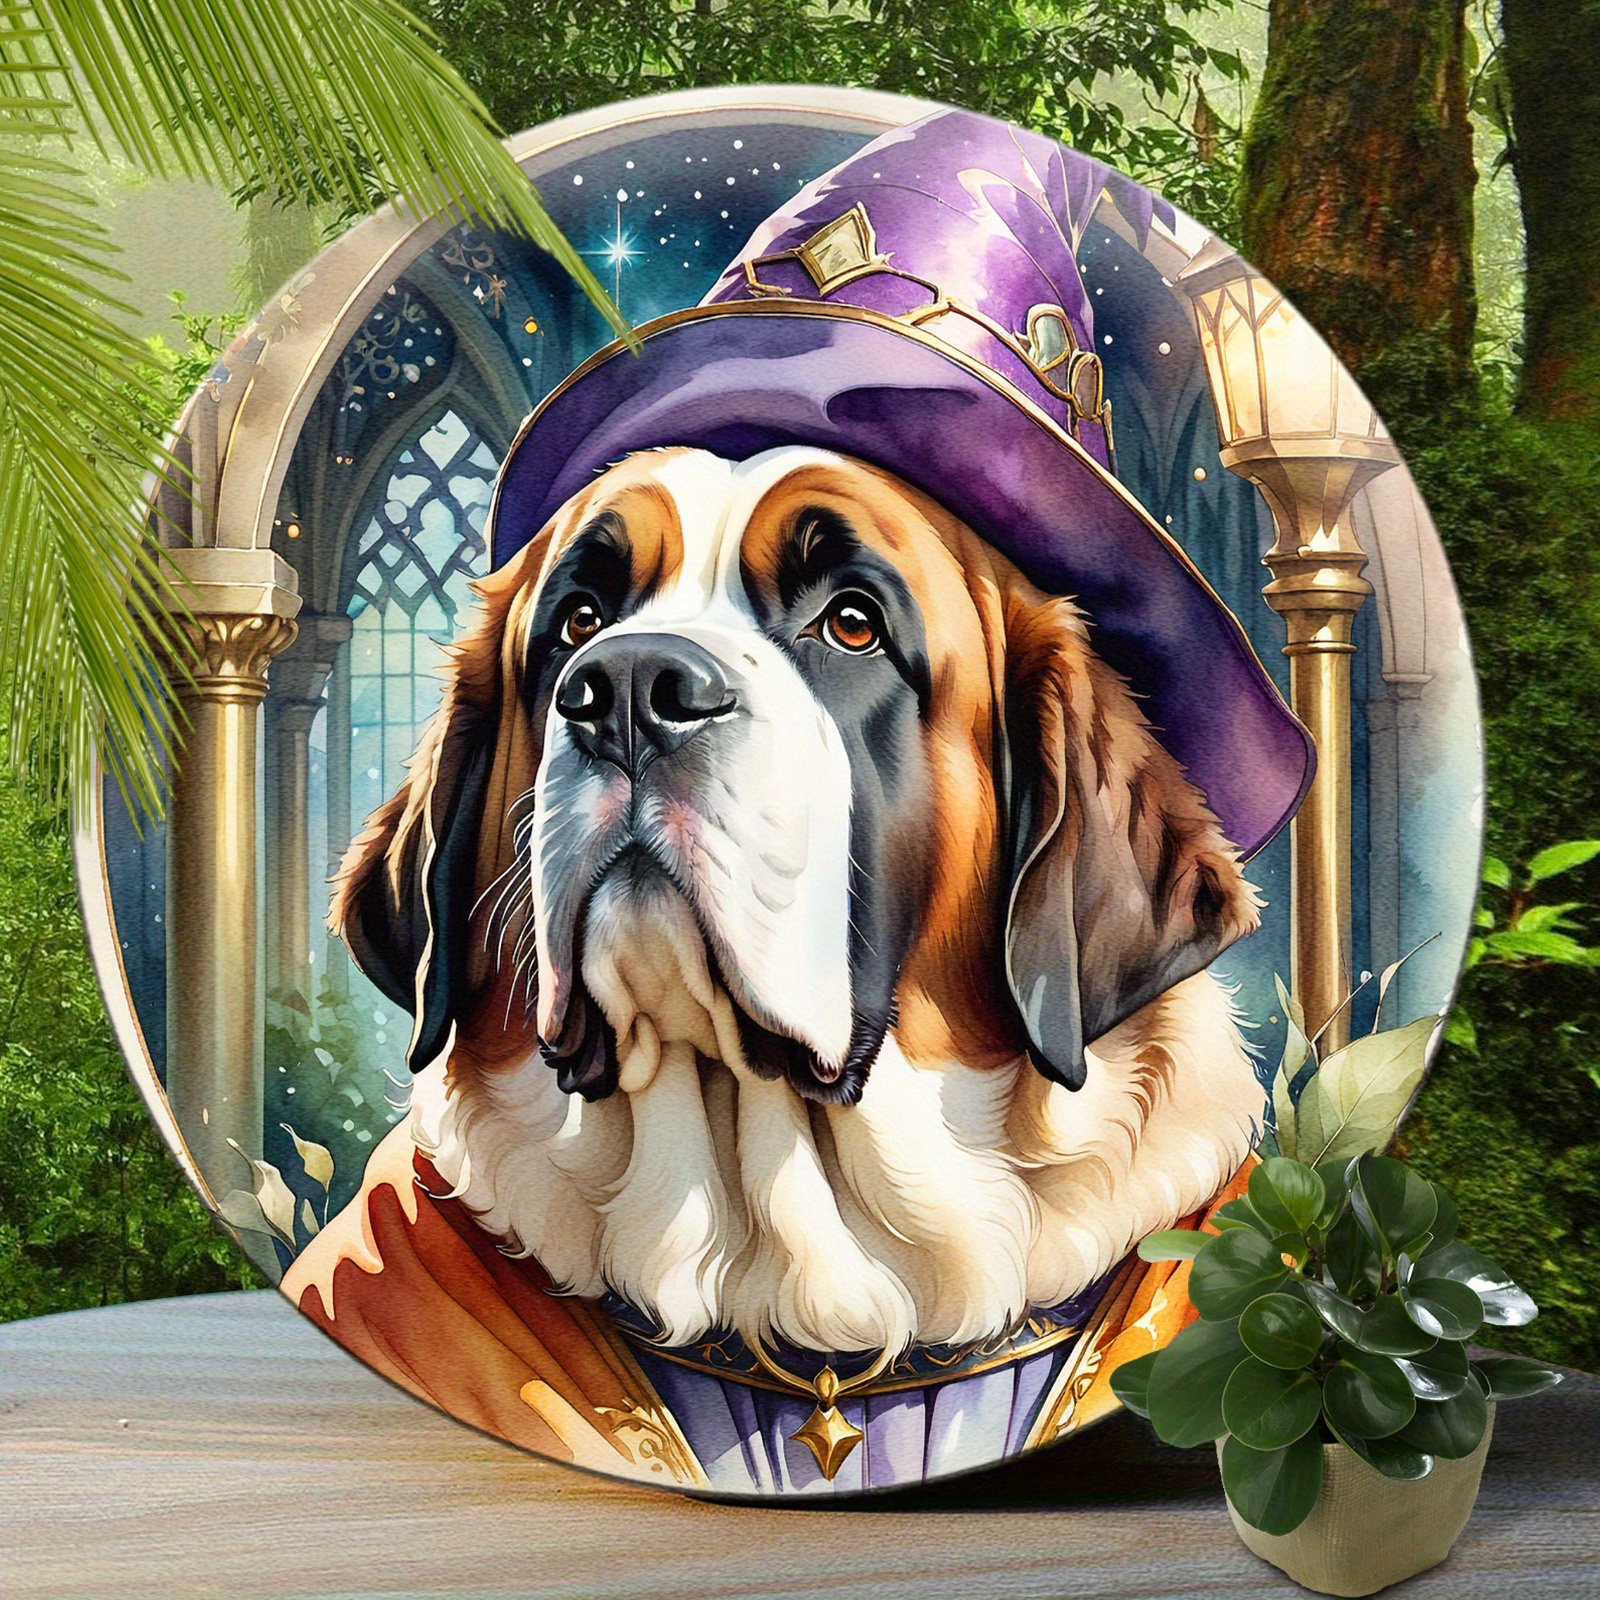 

1pc, St Bernard Dog Sign - Cute Dog Aluminum Sign, Suitable For Home Room Cafe Bedroom Bar Living Room Wall Decor, Round Fashion Art Aesthetic, Holiday Gift (8"x8"/20cm*20cm)